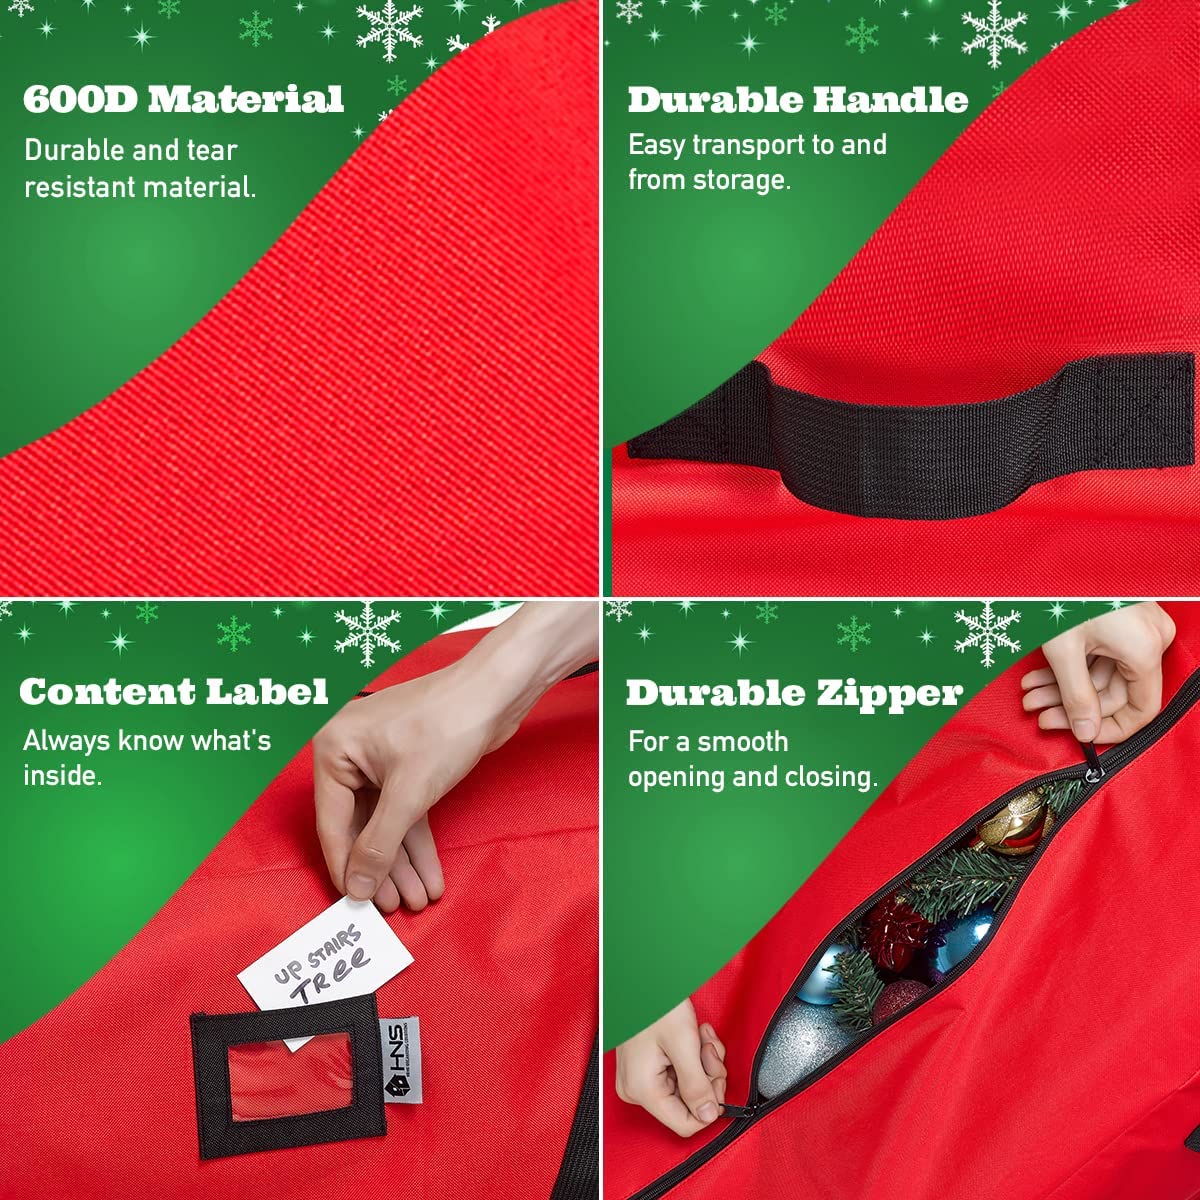 Christmas Tree Storage Bag - Fits up to 9 ft.- Waterproof Storage Bags 600D Oxford Material Tear-Resistant - Tote Bag with Dual Zippers and Reinforced Handles.